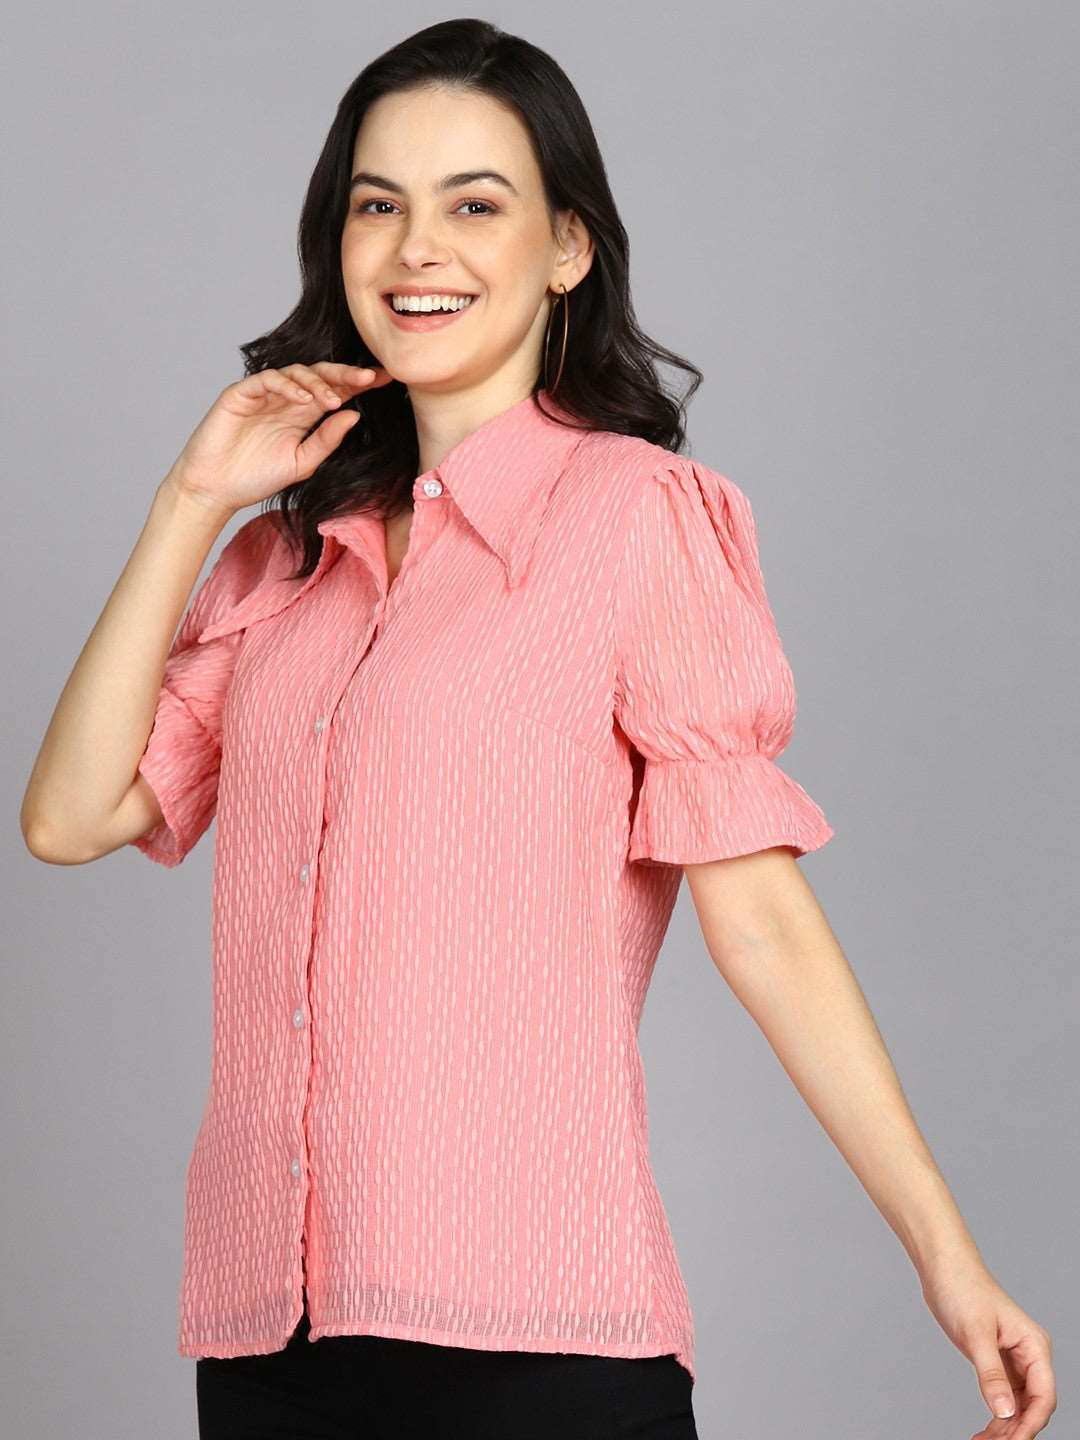 The model in the image is wearing Casual Regular Sleeves Self Design Women Pink Top from Alice Milan. Crafted with the finest materials and impeccable attention to detail, the Western Wear Top looks premium, trendy, luxurious and offers unparalleled comfort. It’s a perfect clothing option for loungewear, resort wear, party wear or for an airport look. The woman in the image looks happy, and confident with her style statement putting a happy smile on her face.